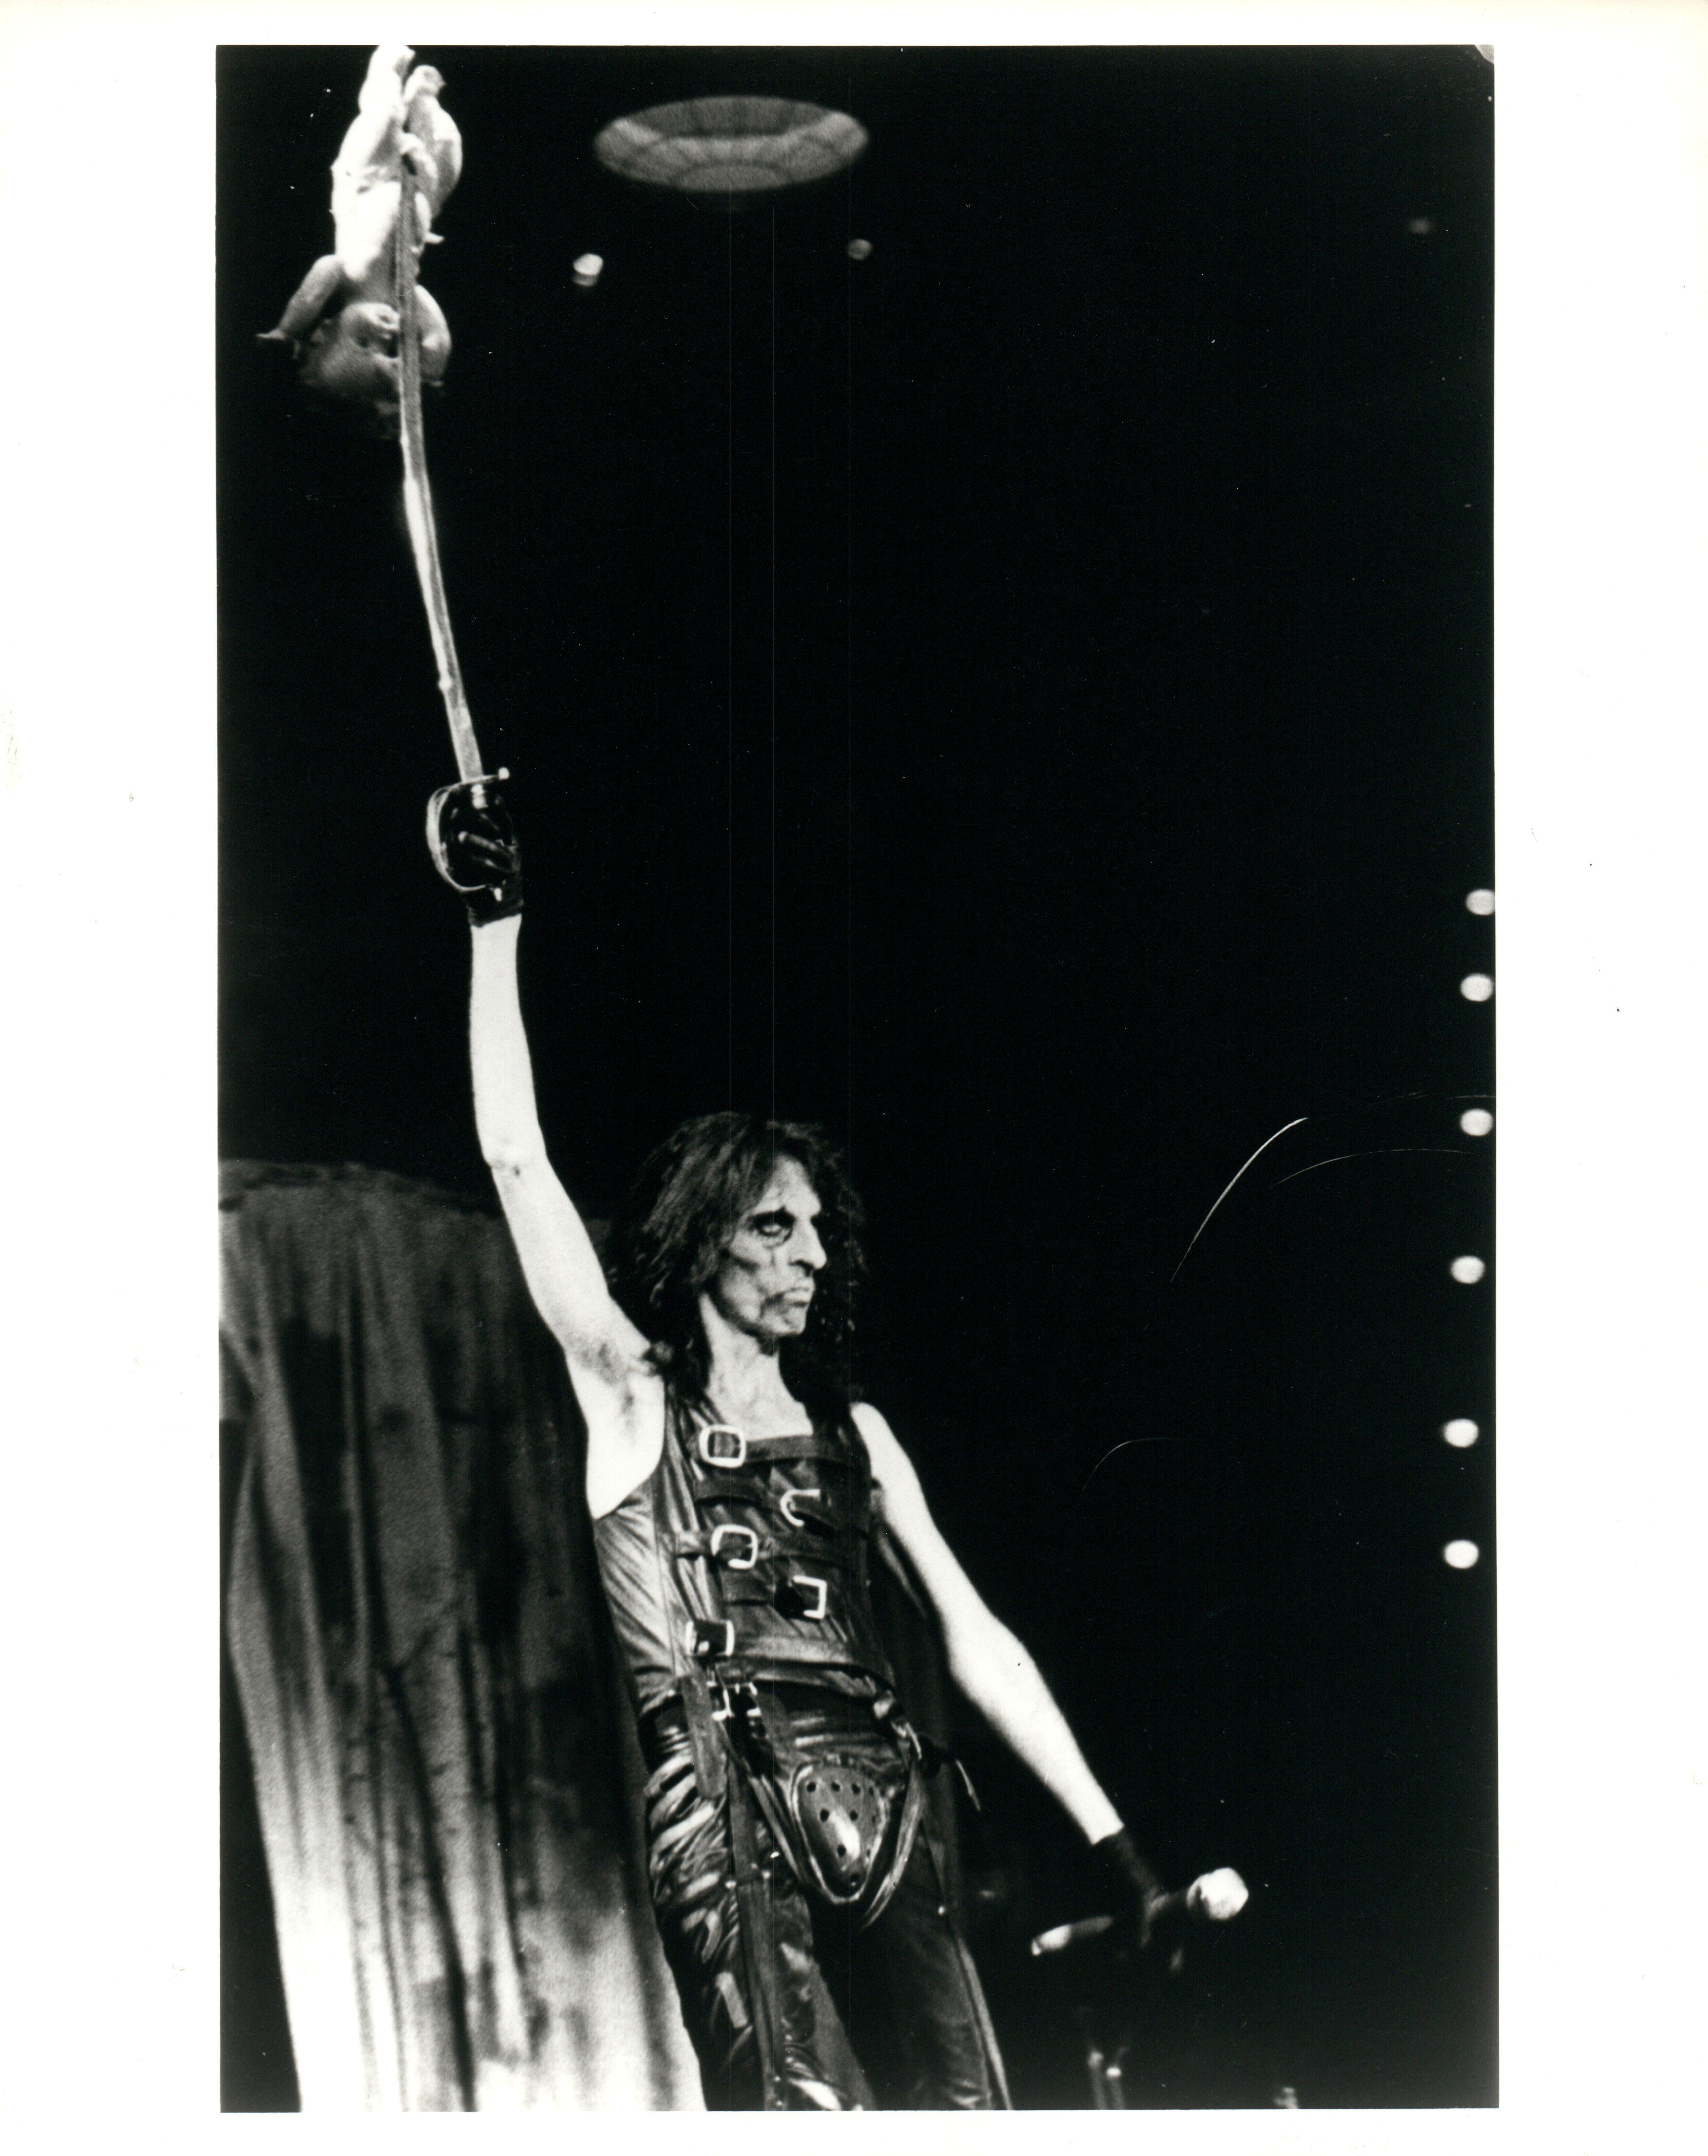 Janet Macoska Portrait Photograph - Alice Cooper on Stage with Sword Vintage Original Photograph